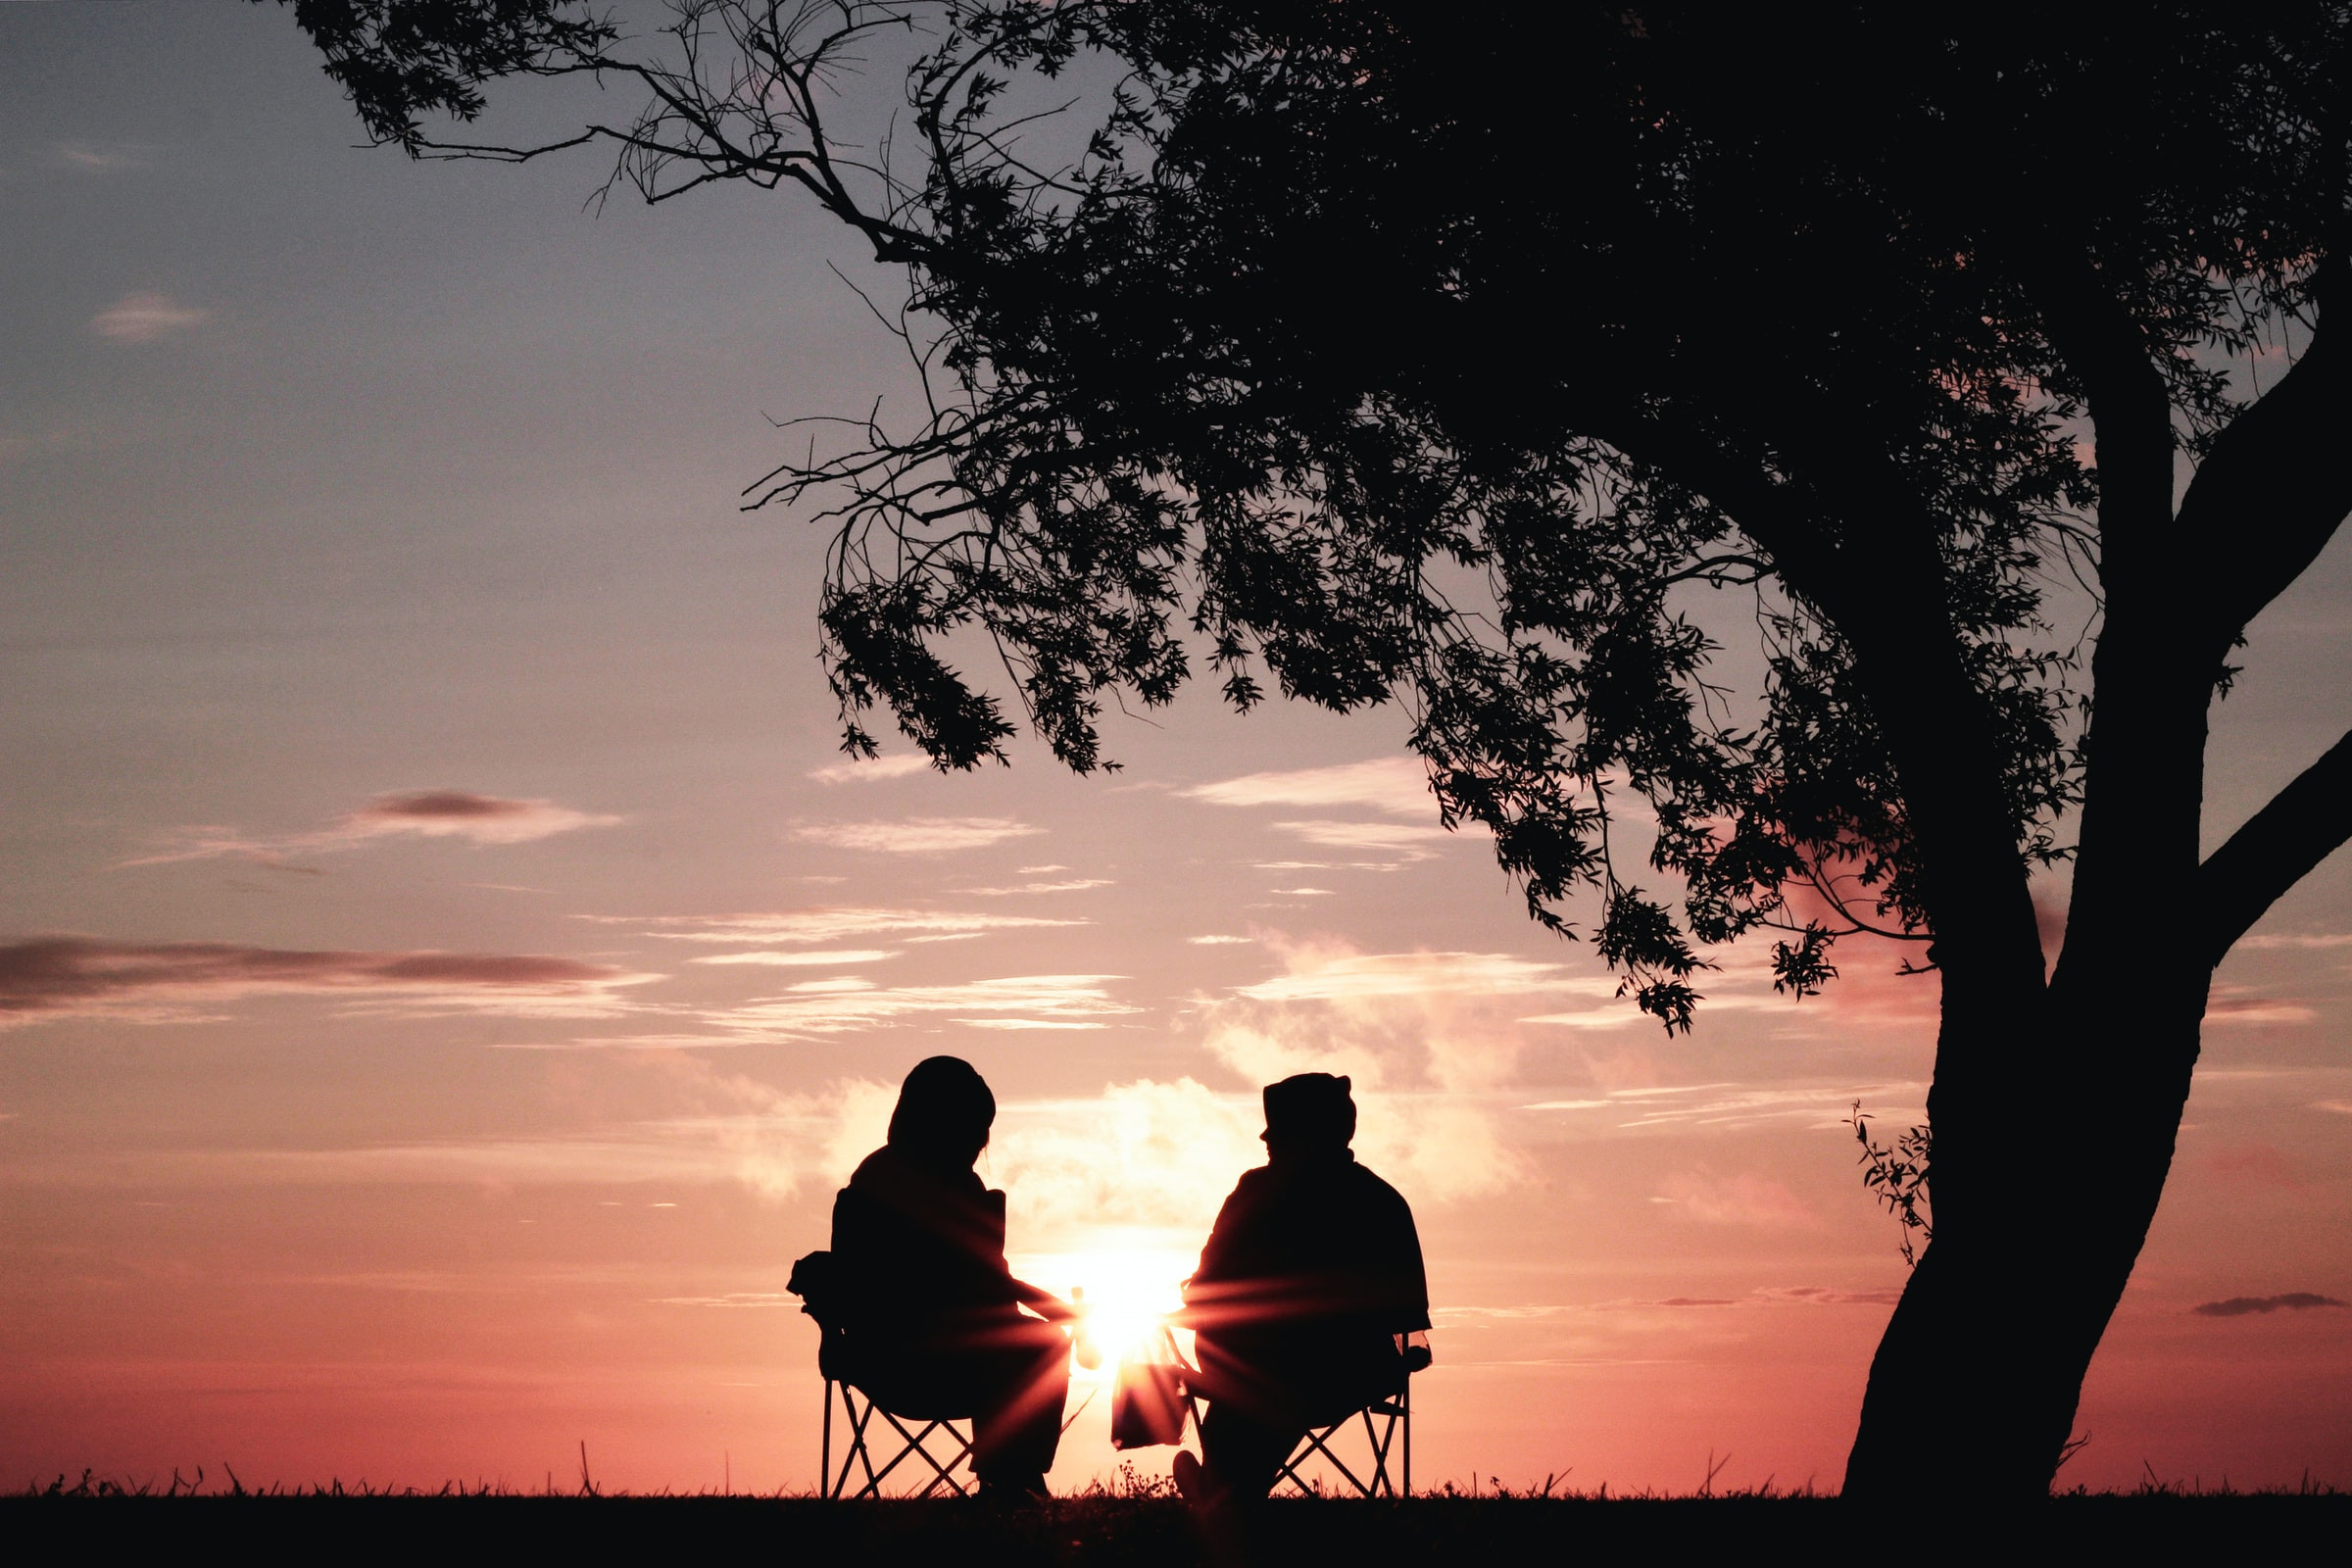 Two people talking in chairs under a tree at sunset